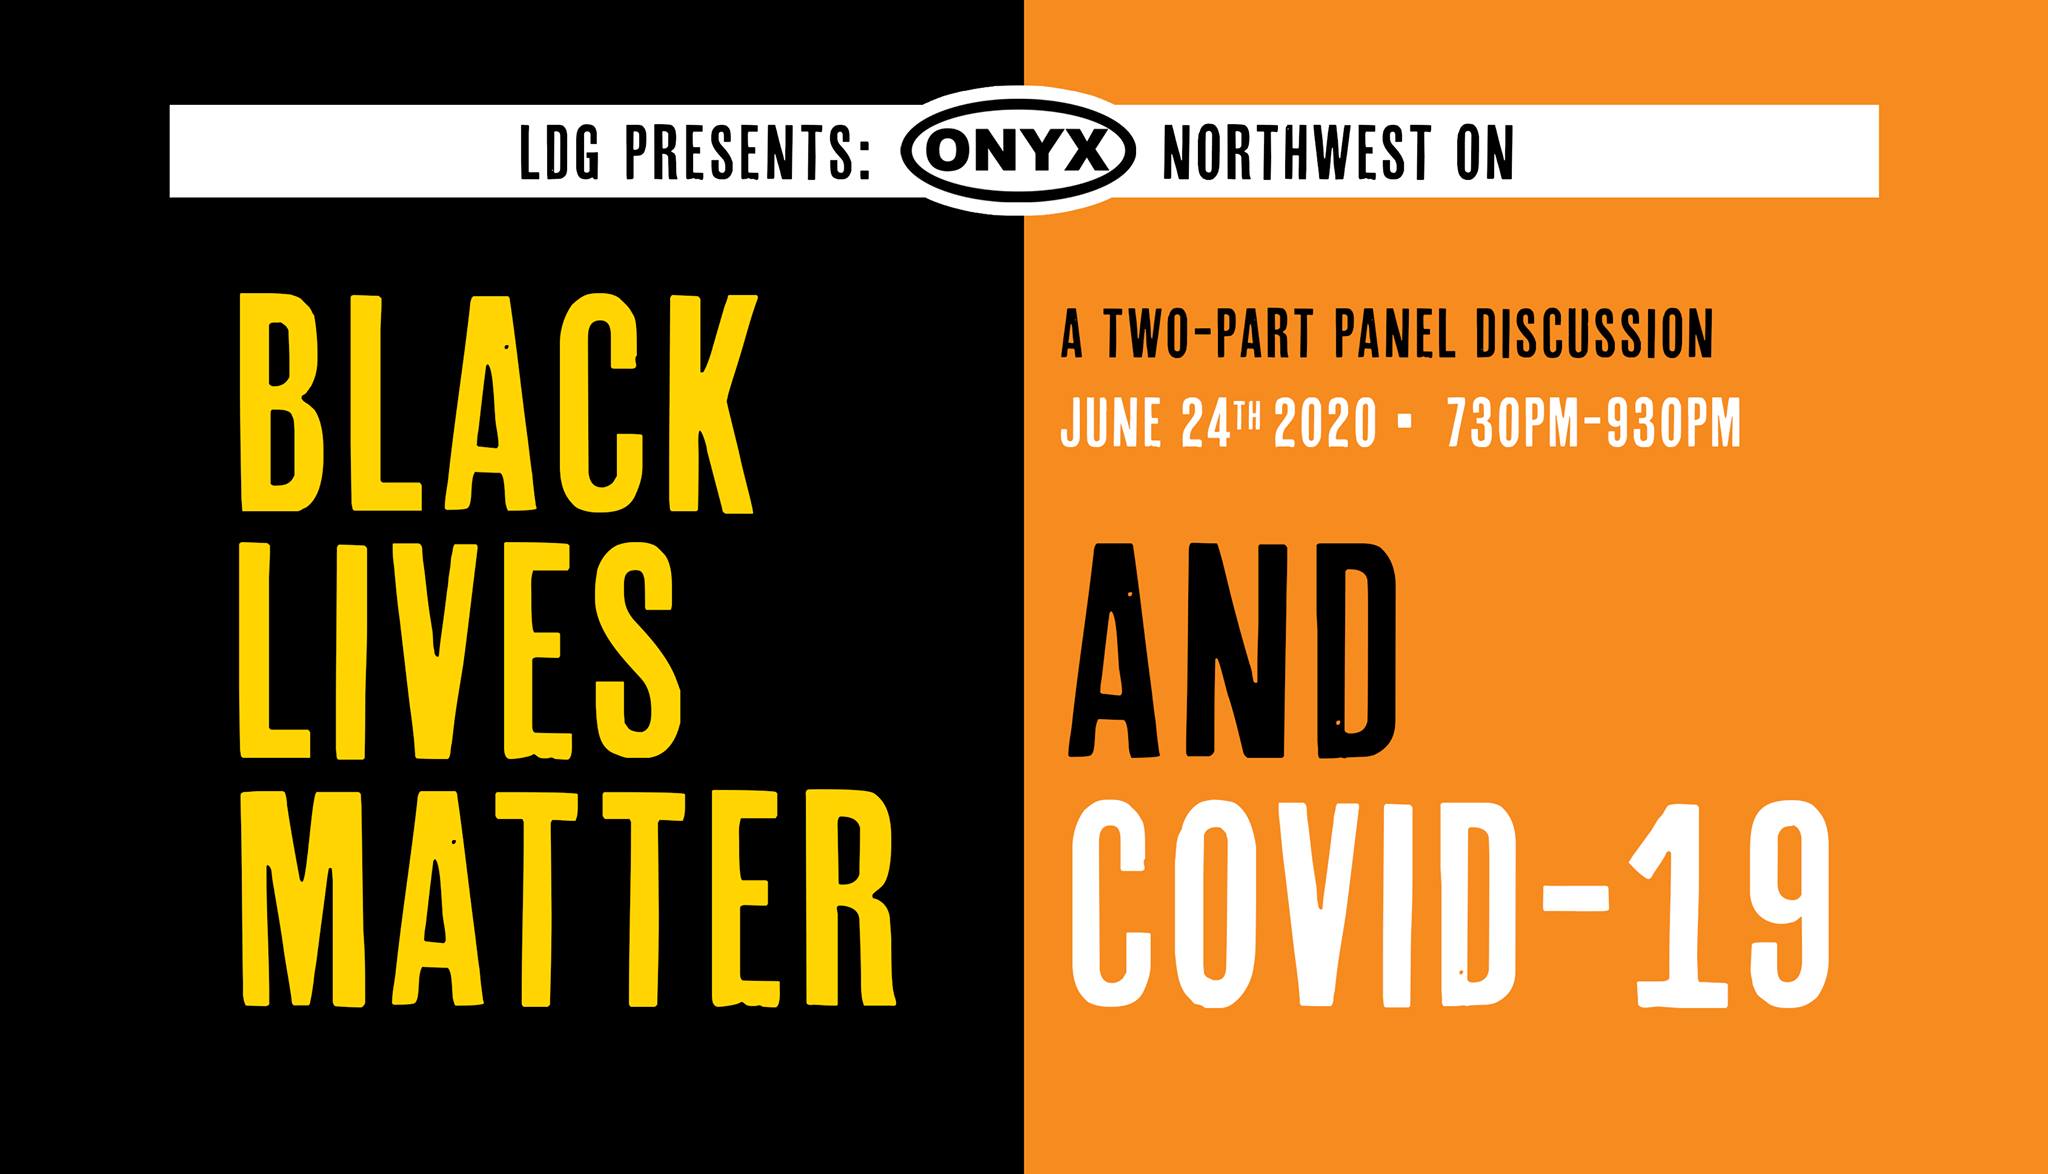 ONYX Brothers + Black Lives Matter + COVID-19